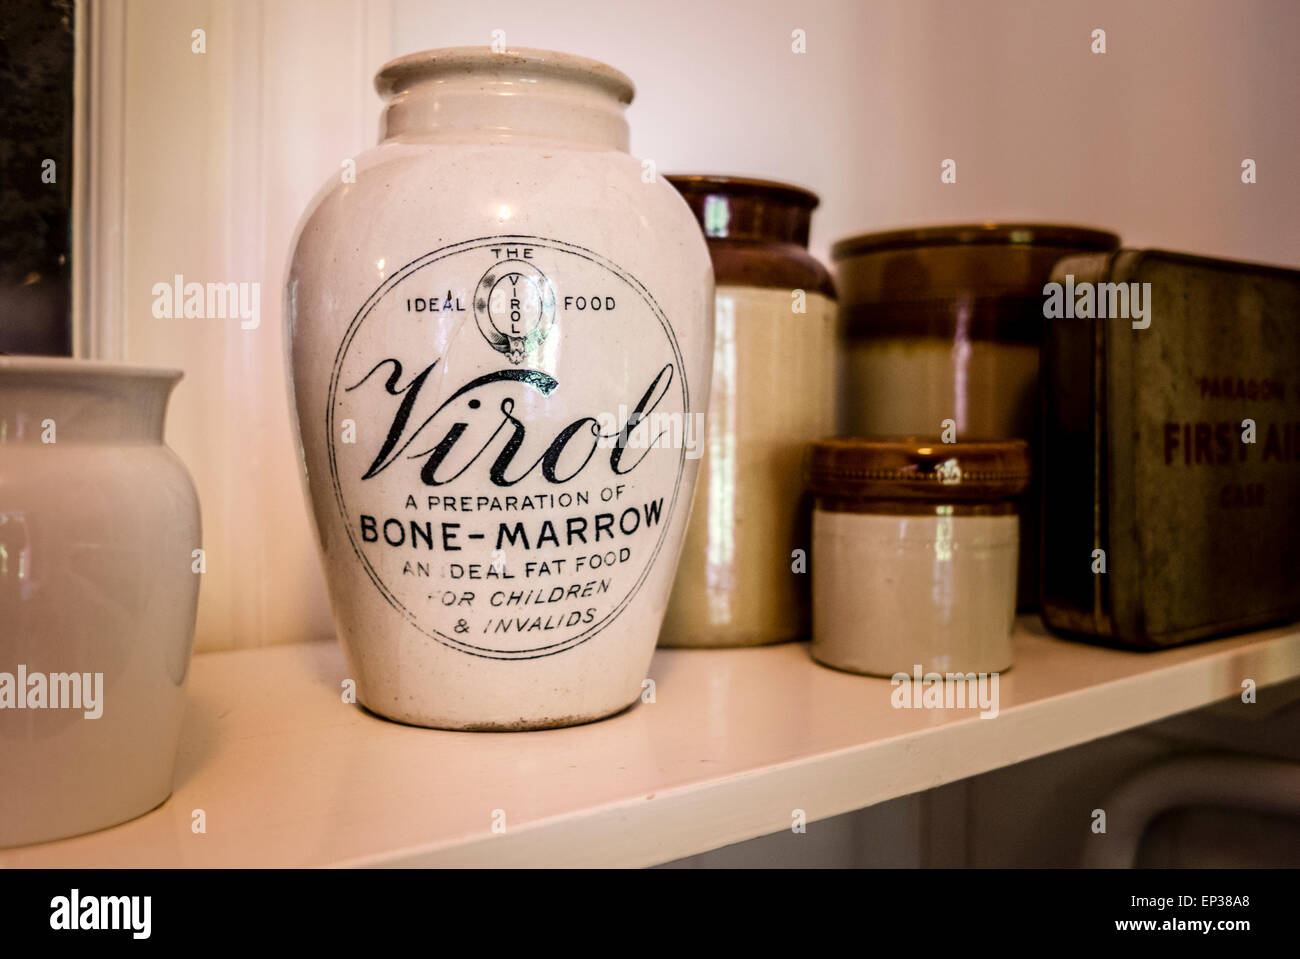 Old Virol jar on shelf in historic home open to the public illustrating life in Victorian Britainu Stock Photo